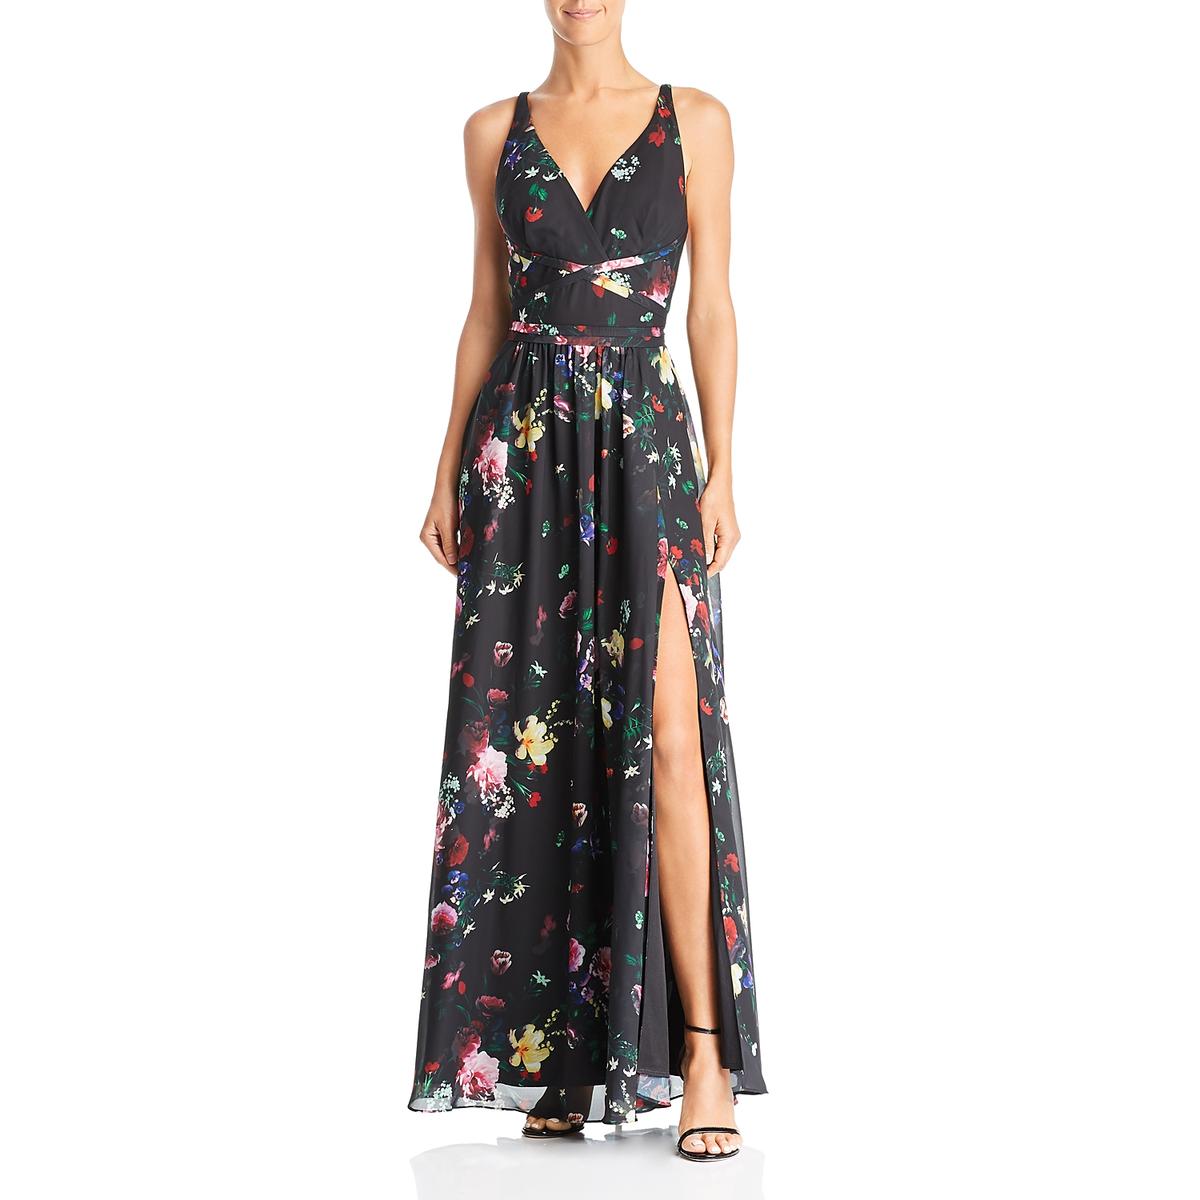 Laundry by Shelli Segal Womens Black Floral Evening Dress Gown 12 BHFO ...